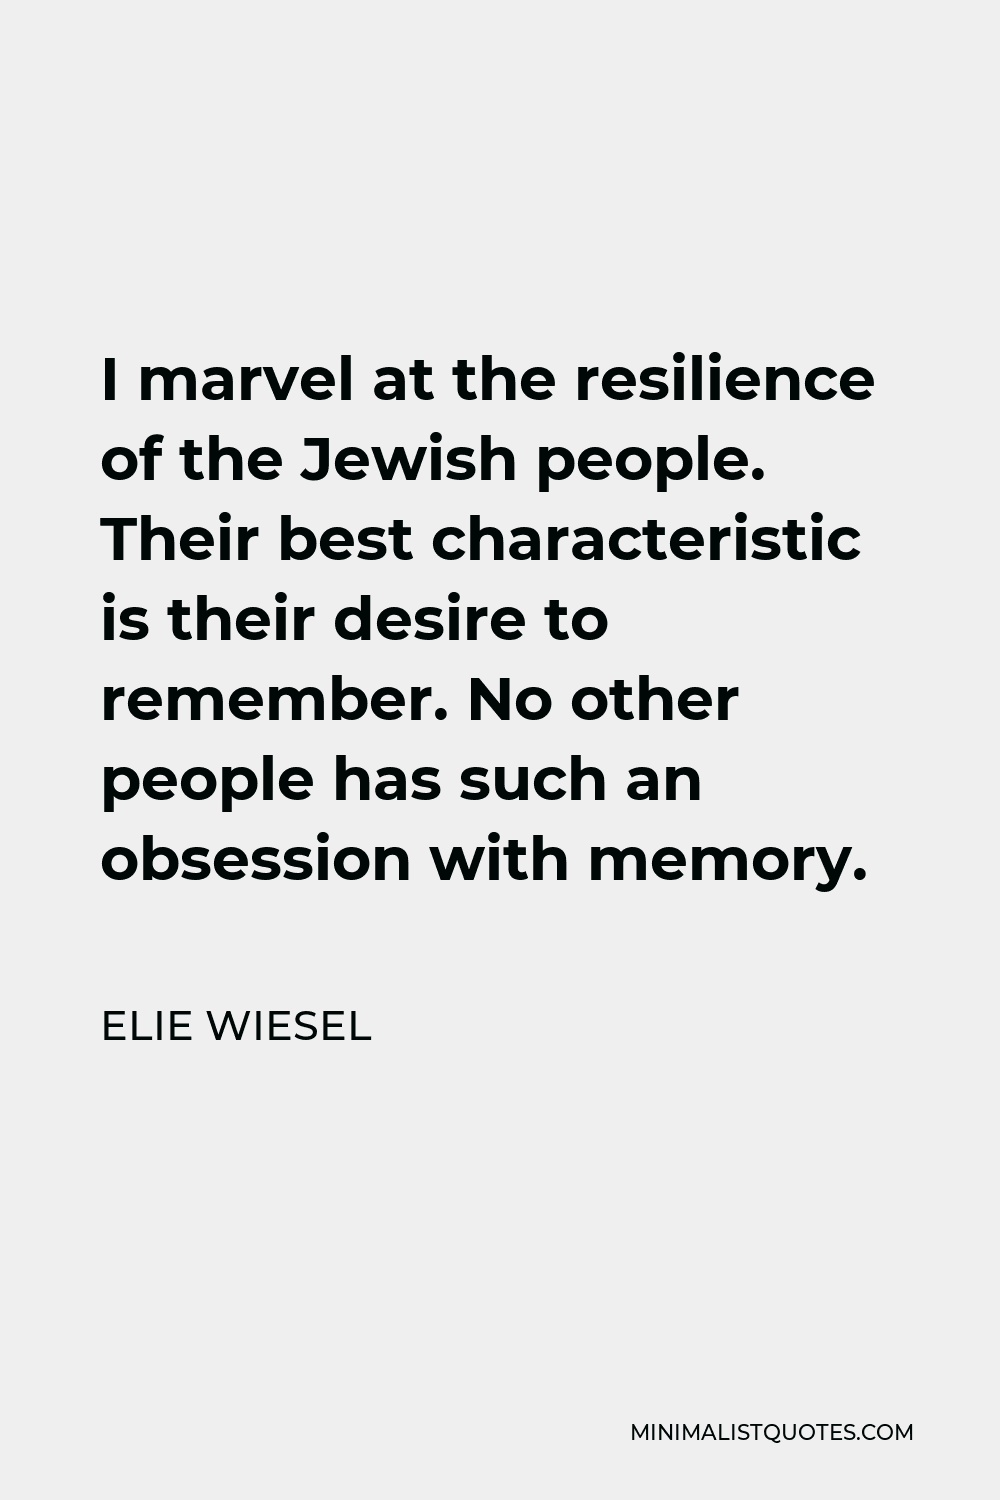 Elie Wiesel Quote - I marvel at the resilience of the Jewish people. Their best characteristic is their desire to remember. No other people has such an obsession with memory.